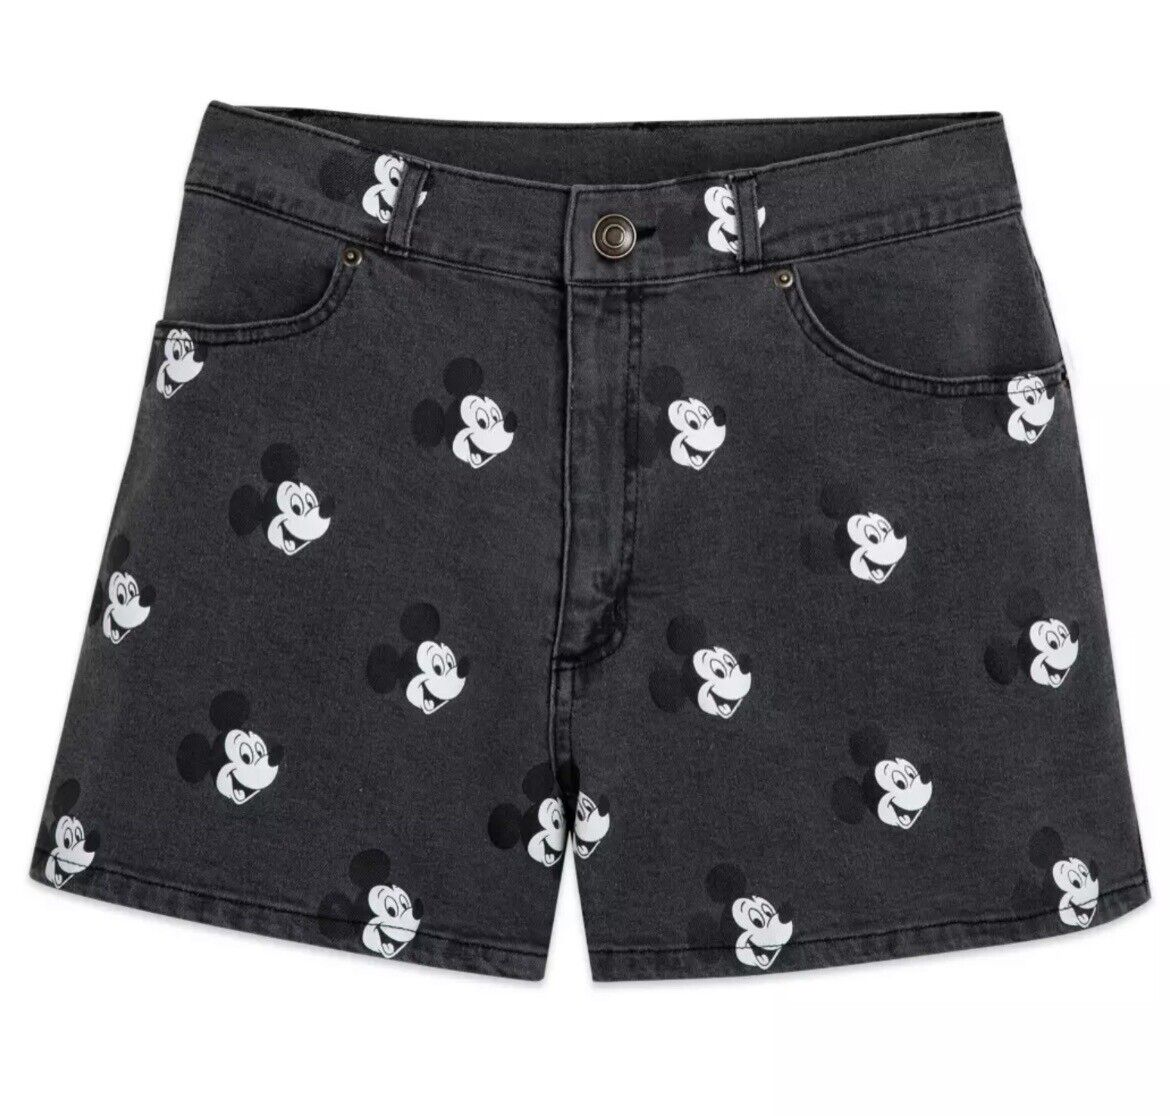 Mickey Mouse Denim Shorts for Adults by Cakeworthy – Disney100